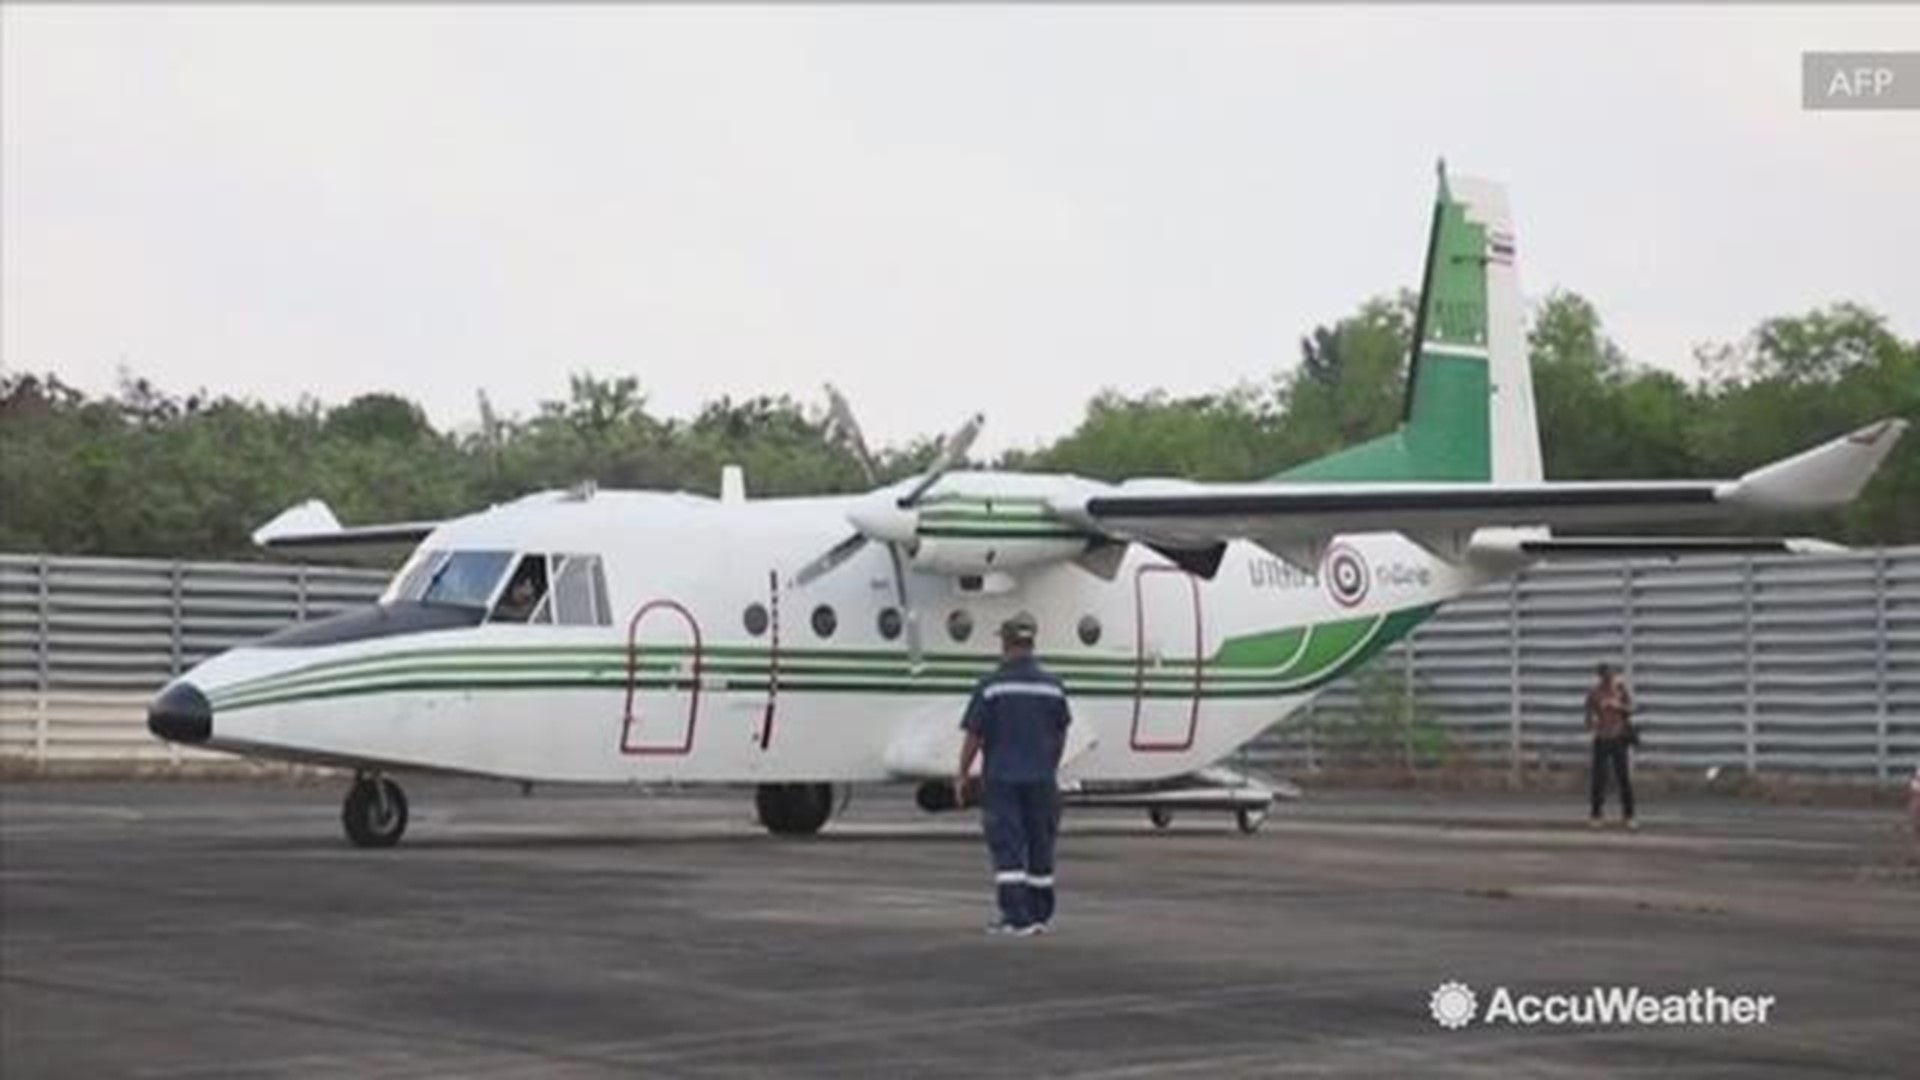 Thailand has deployed planes that can literally make it rain to help fight air pollution. The planes release several chemicals into clouds, as well as ice, to produce the rain.